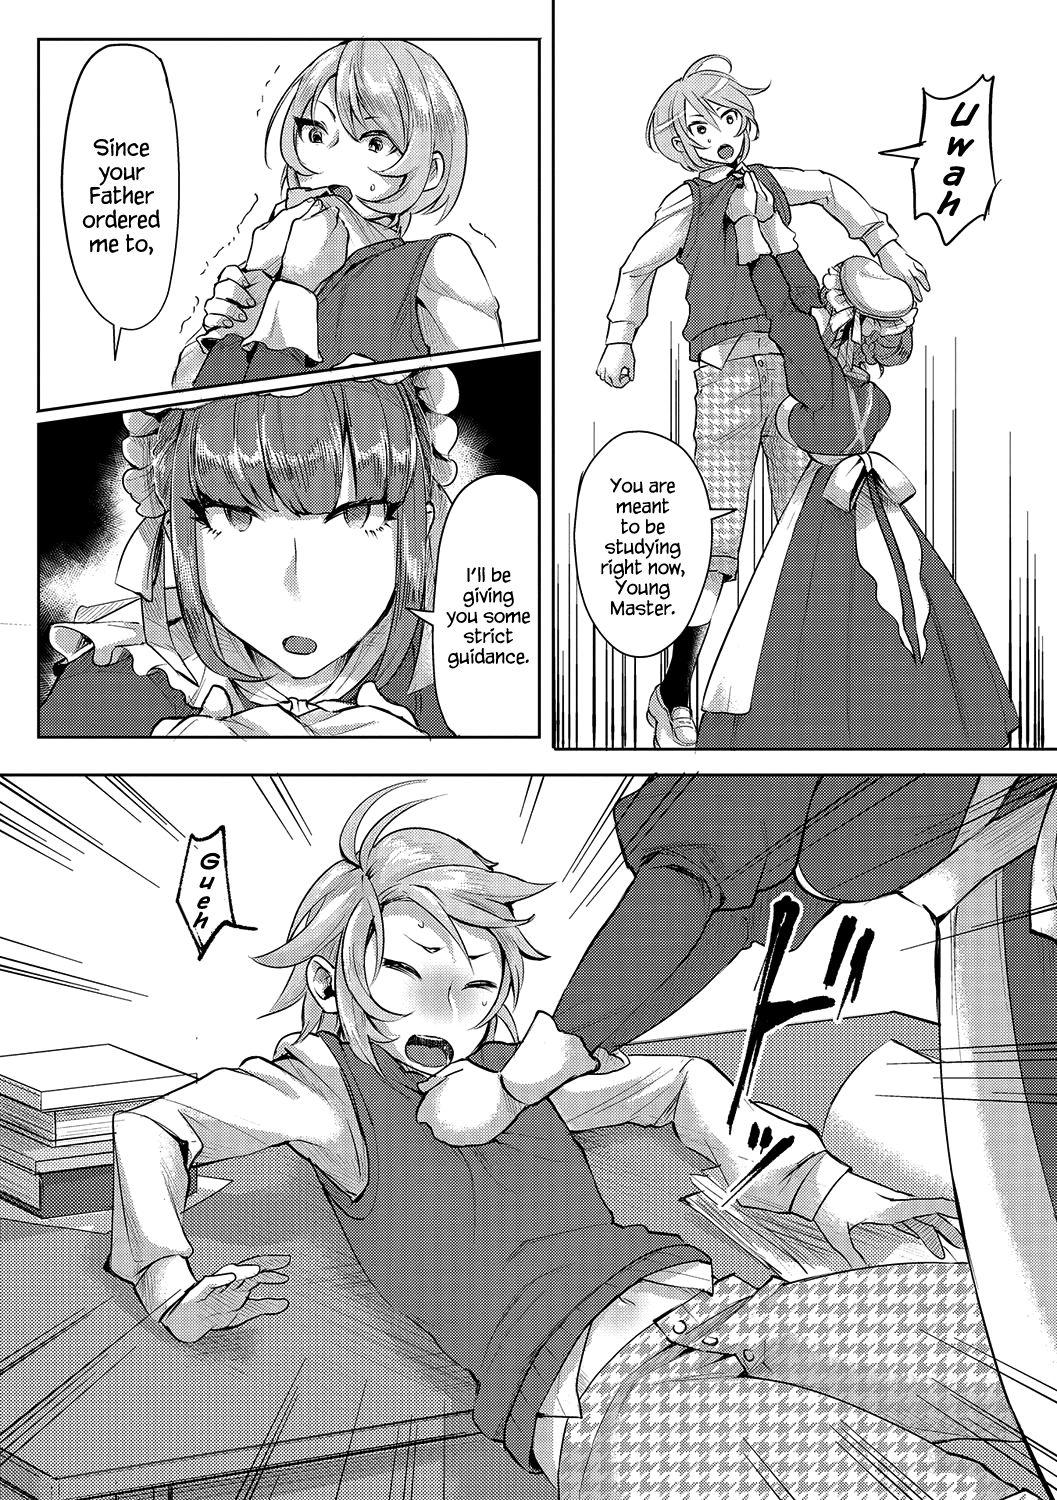 Web Bocchama no Aibou Maid | The Young Master’s Partner Maid Food - Page 4